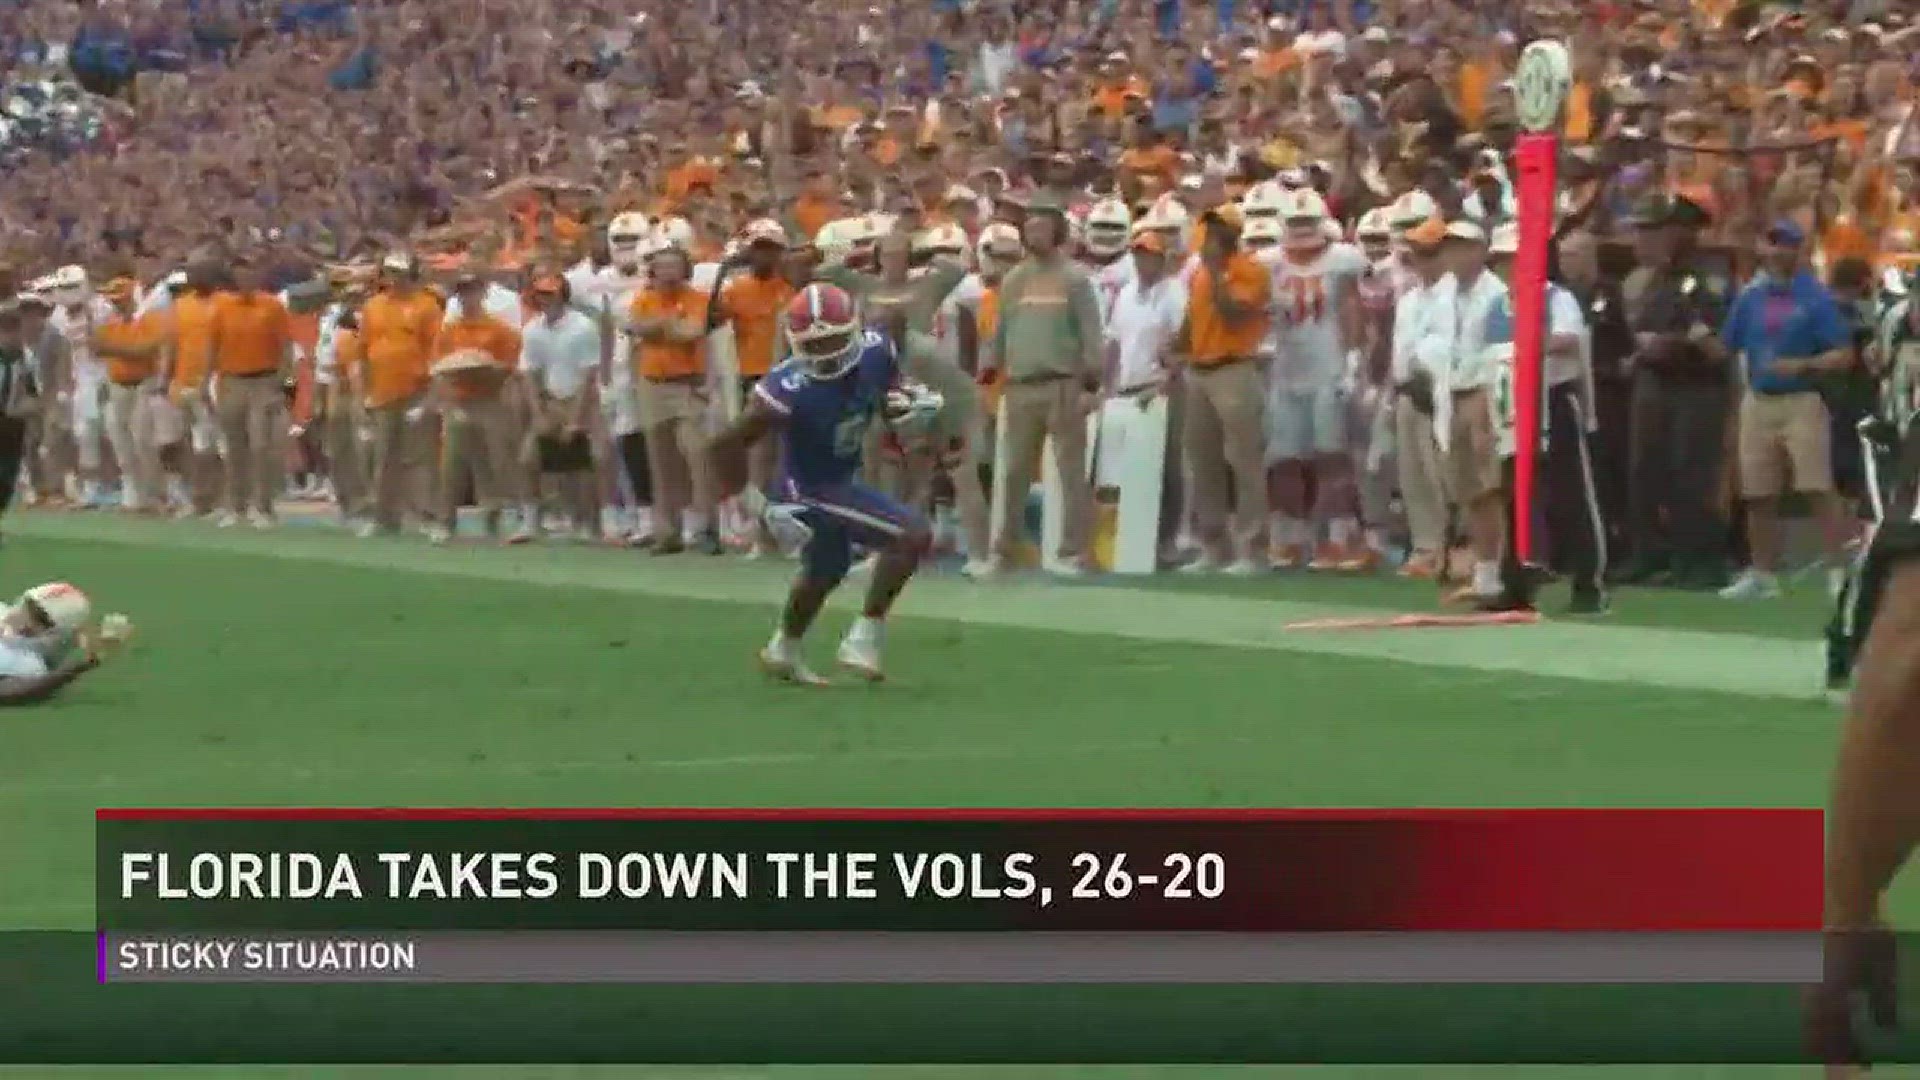 A 63-yard bomb on the final play of the game gave the Gators the win but several other mistakes contributed to a loss for the Vols.